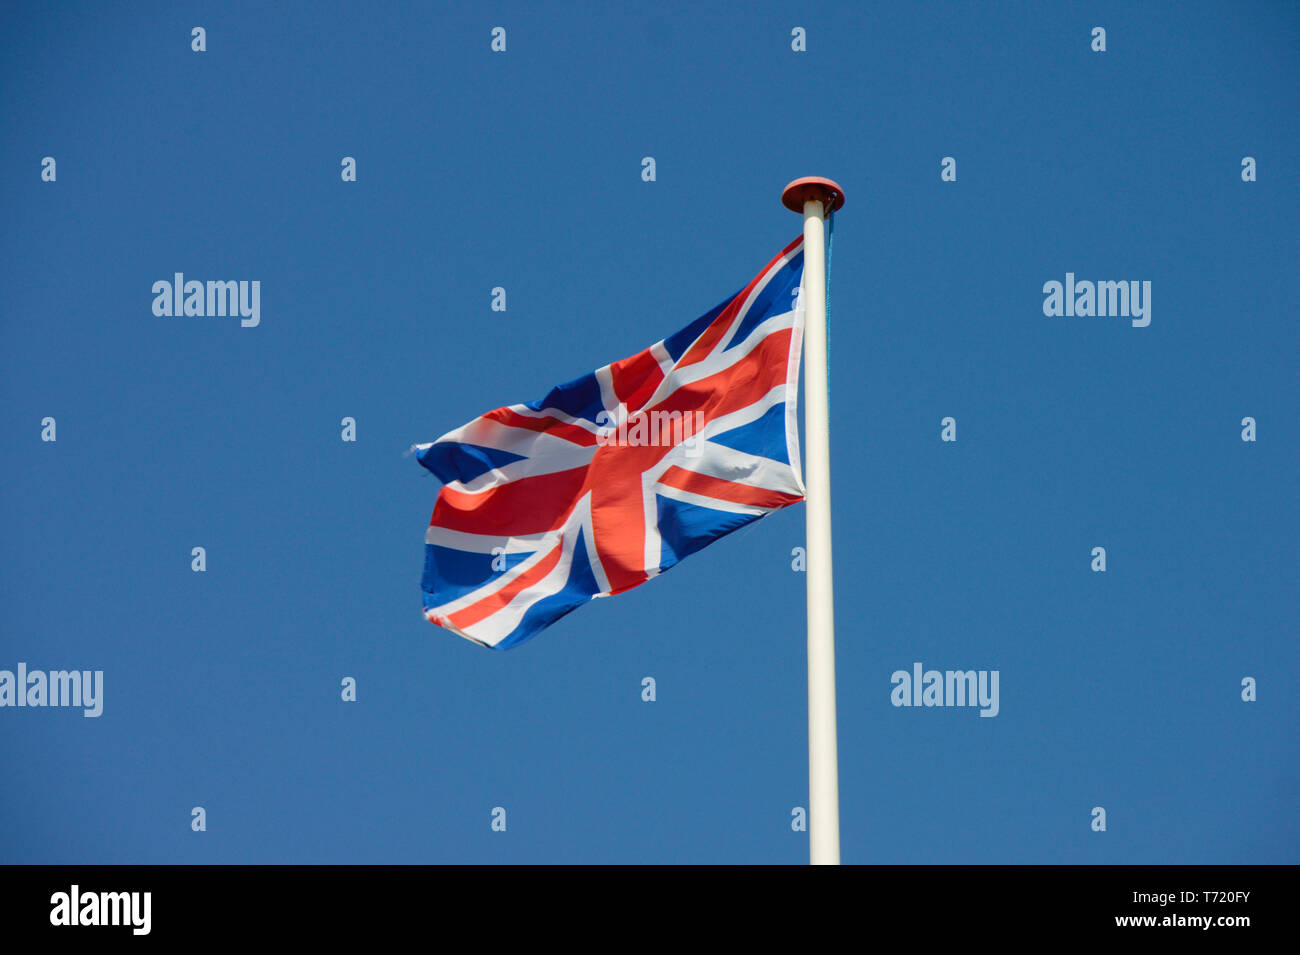 Union Jack, flag of the united kingdom flapping in the wind. Blue sky in the background. Stock Photo